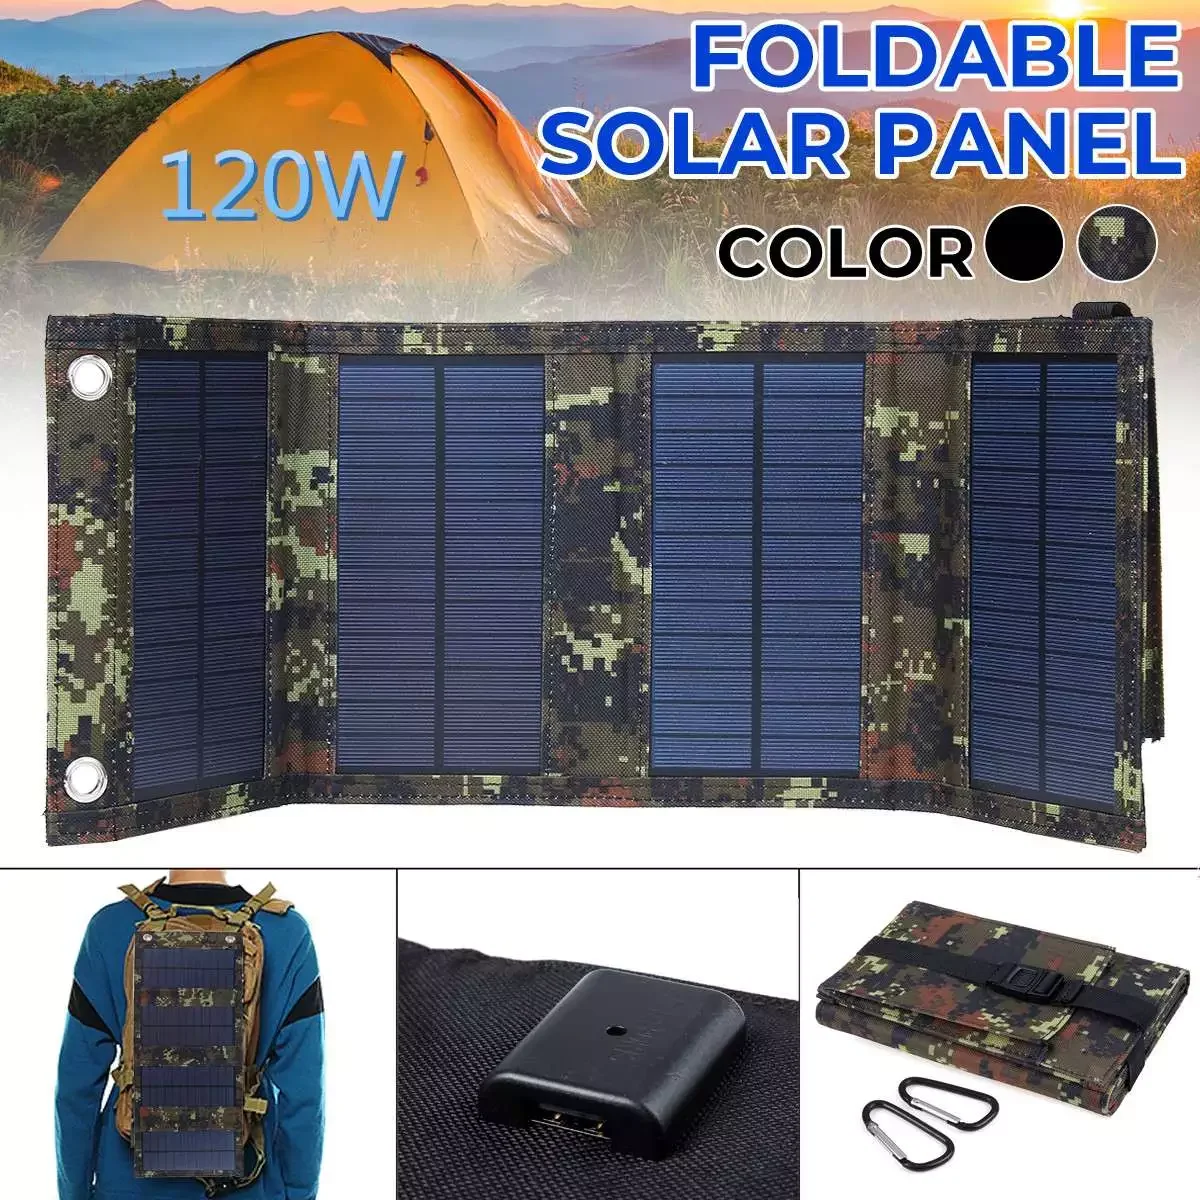 

NEW 120W Foldable Solar Panel Sun Power Solar Cells Charger Battery 5V USB Protable Solar Panels for Smartphone Camping Outdoor